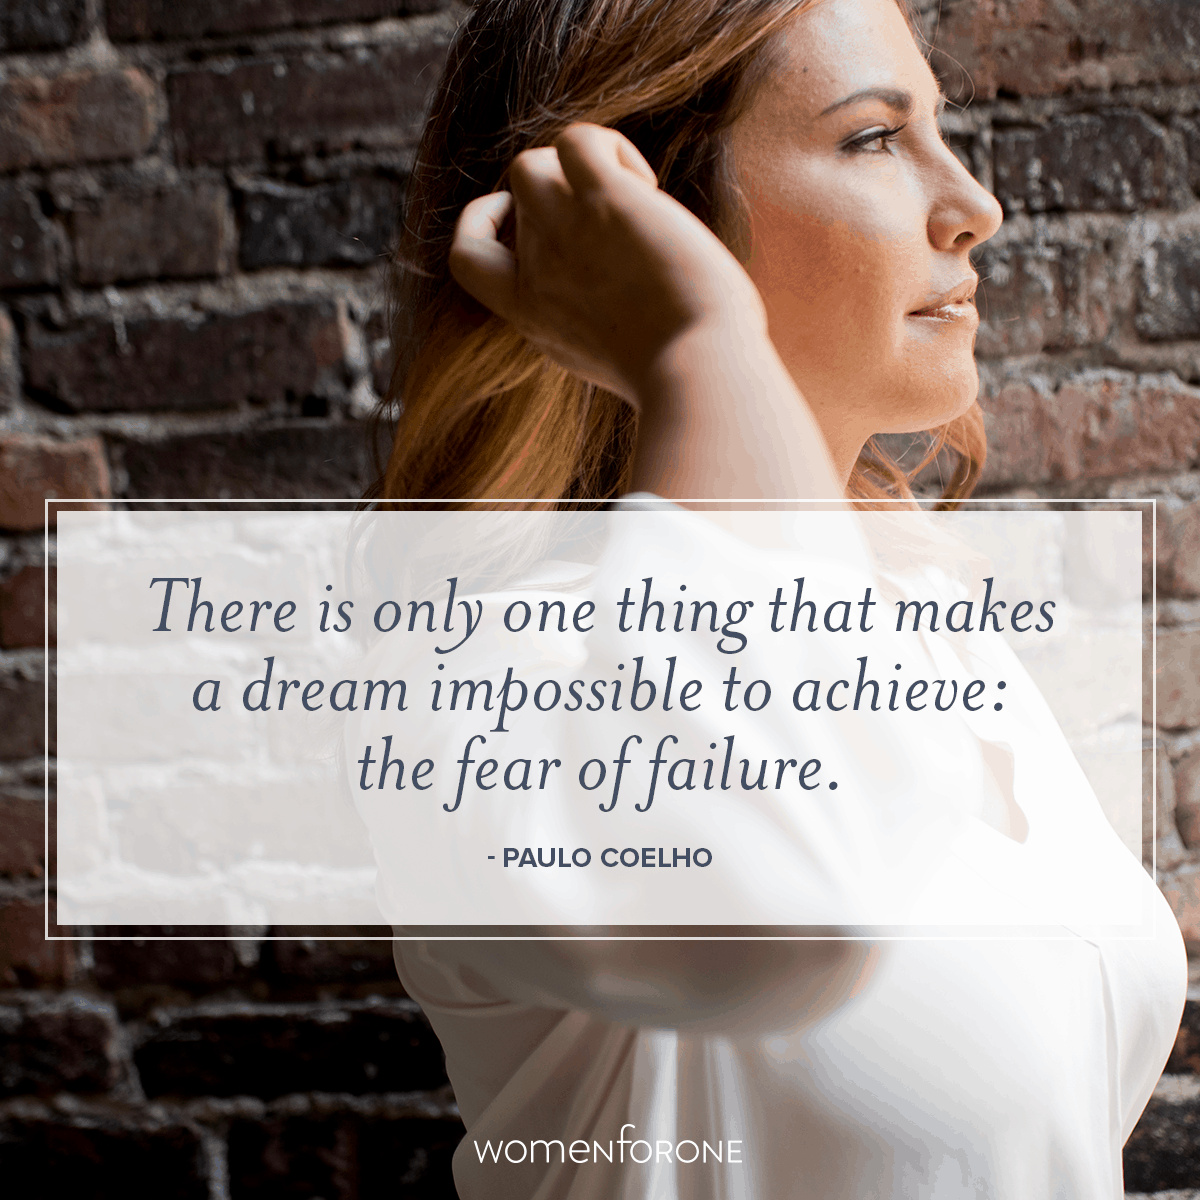 There is only one thing that makes a dream impossible to achieve: the fear of failure. - Paulo Coelho